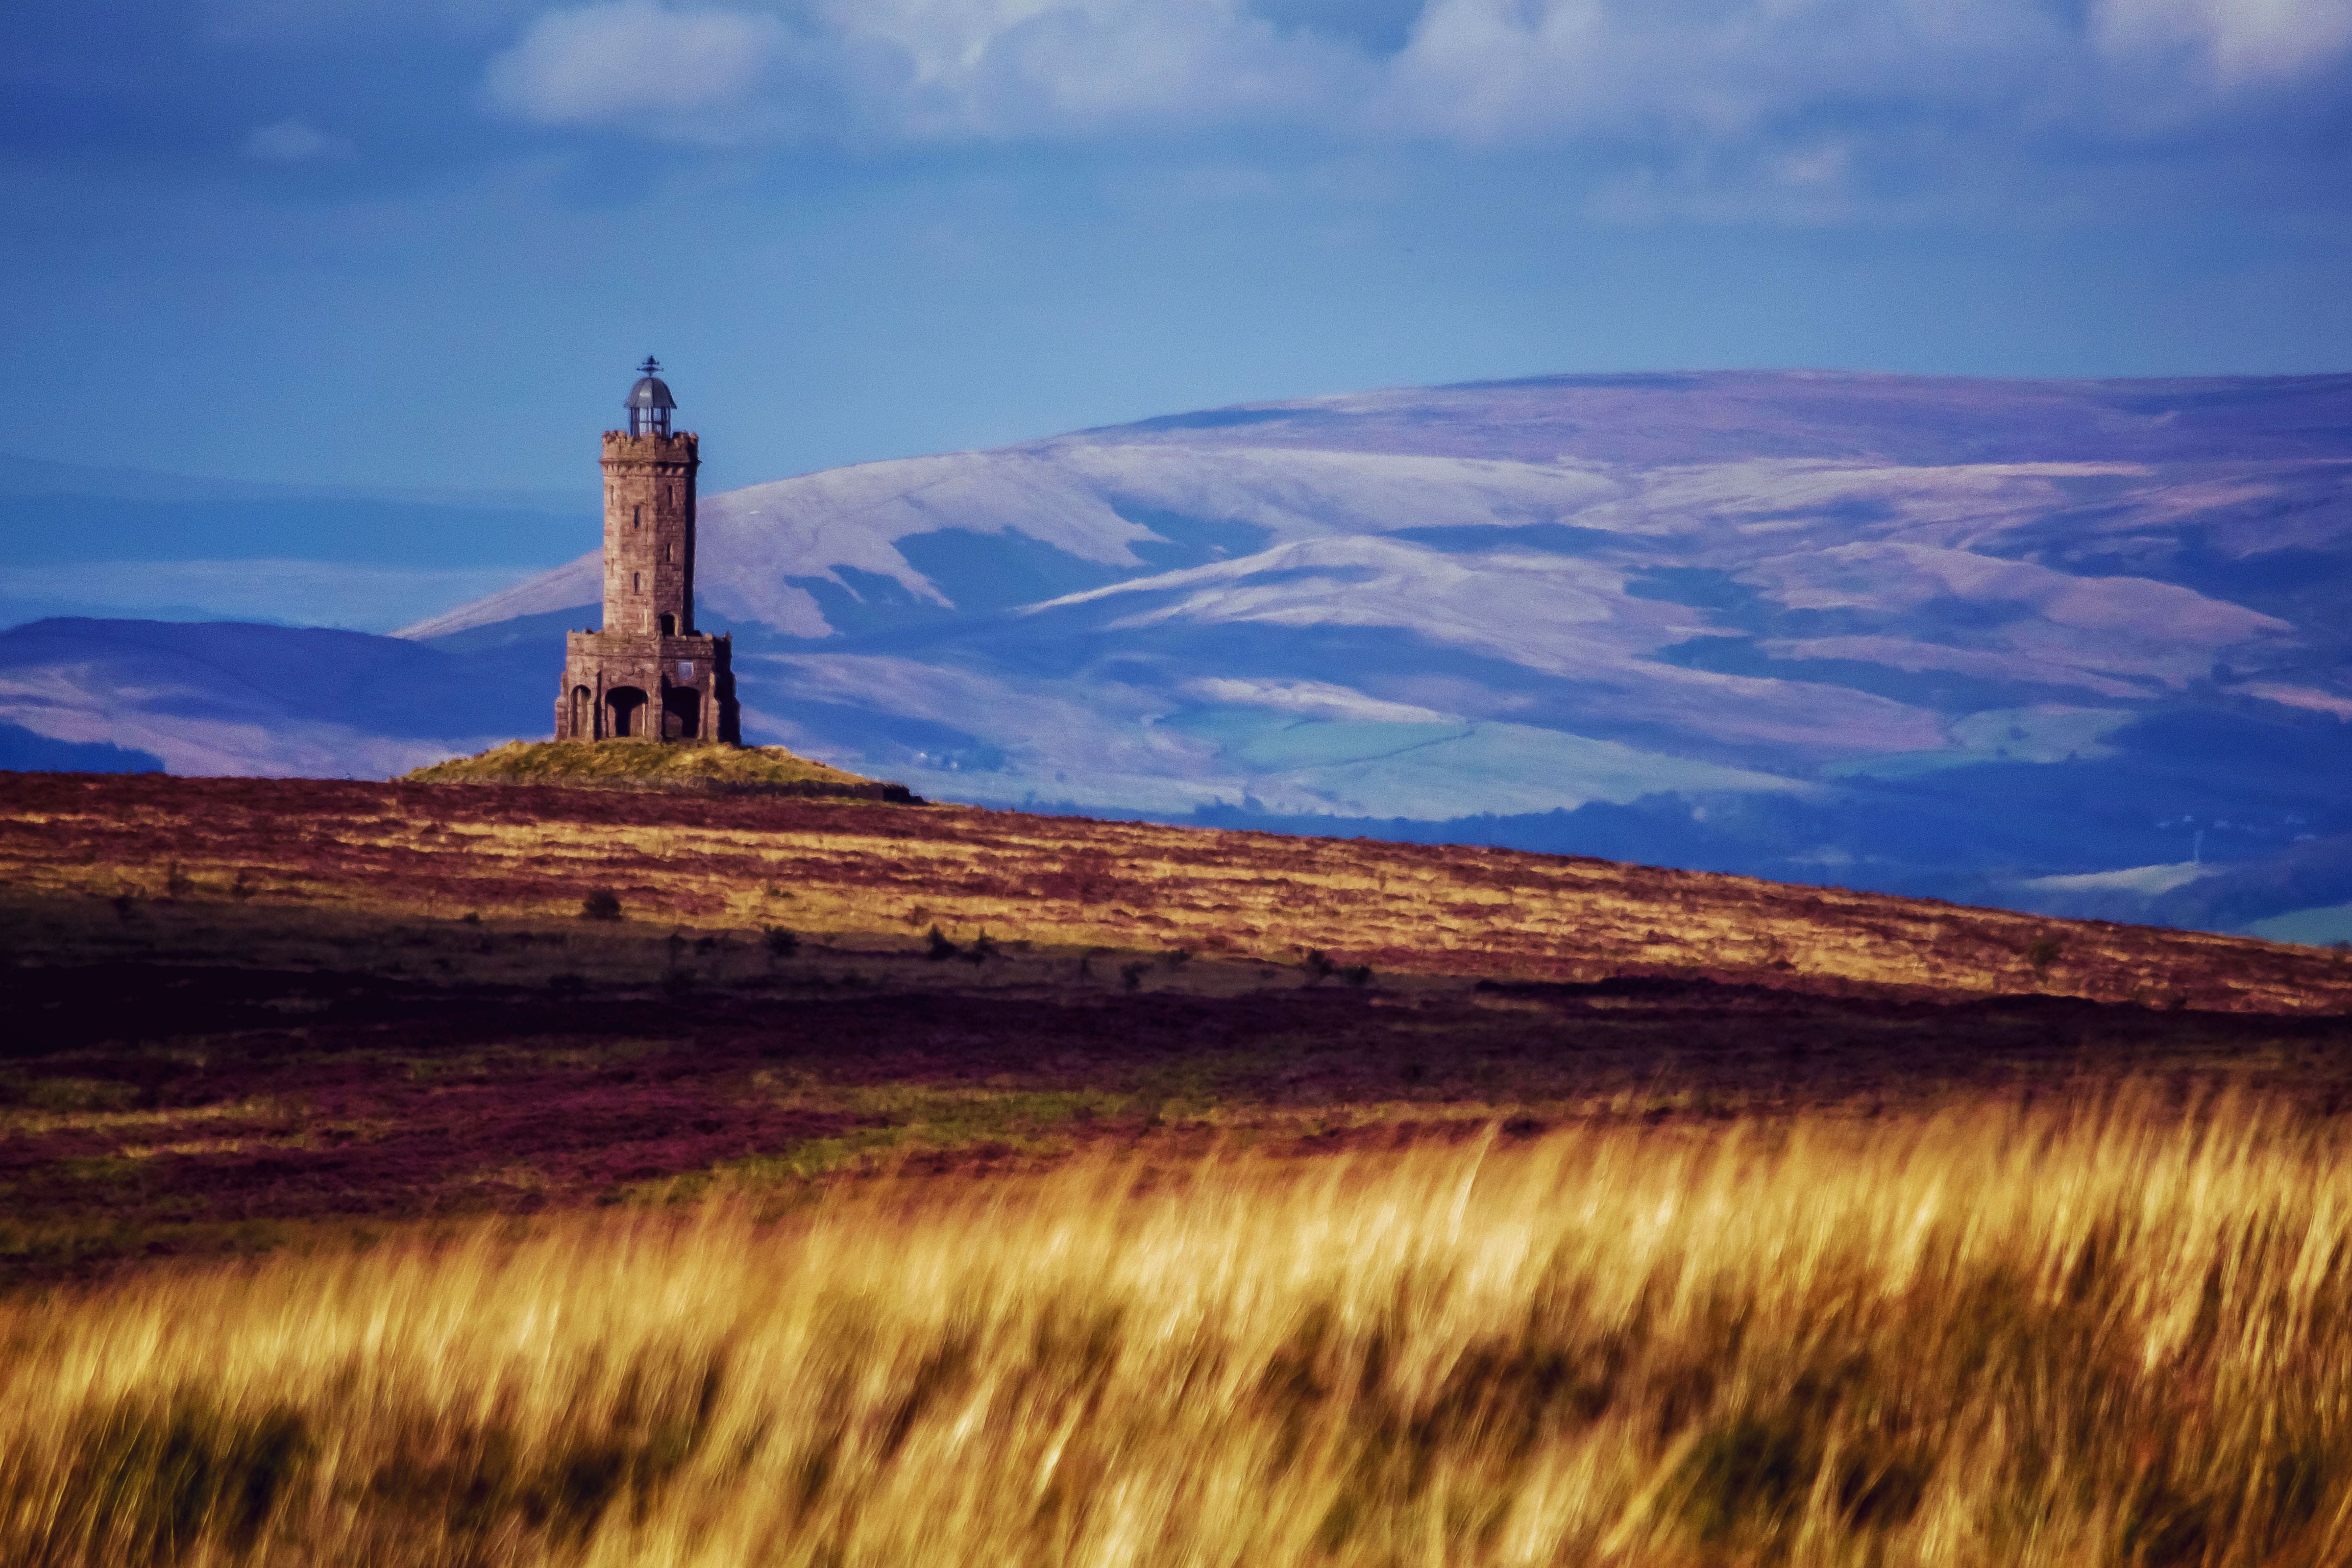 View of the Tower over moorland